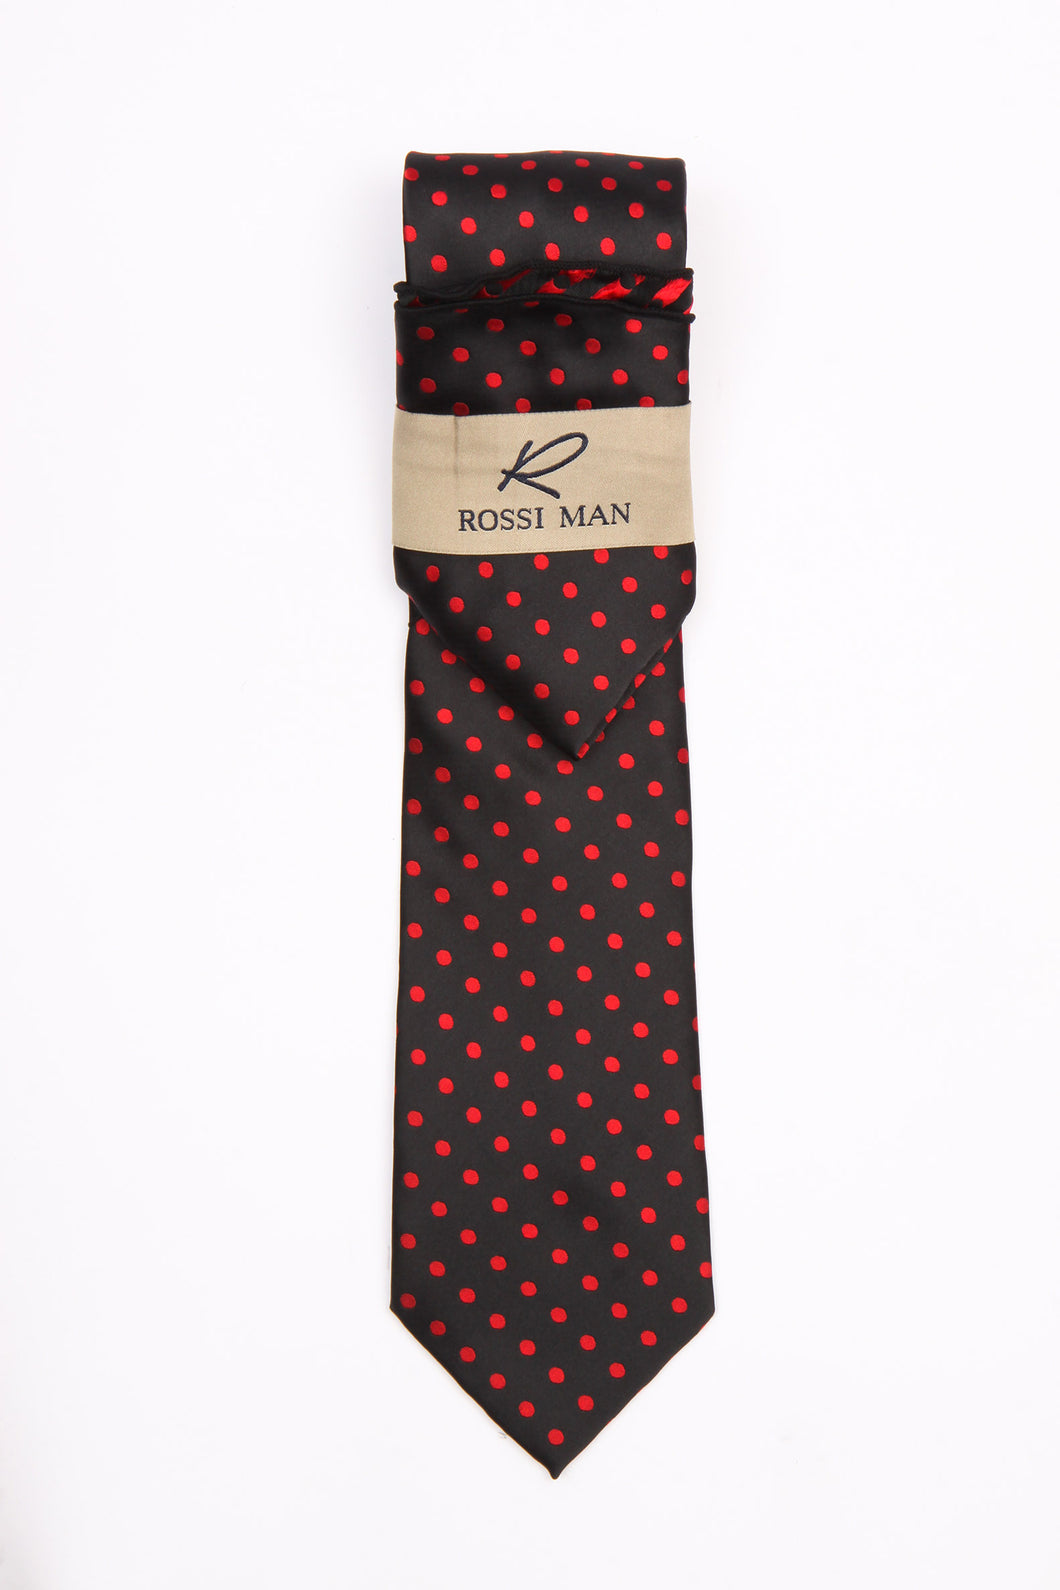 Rossi Man Tie and Pocket Round - RMR662-5